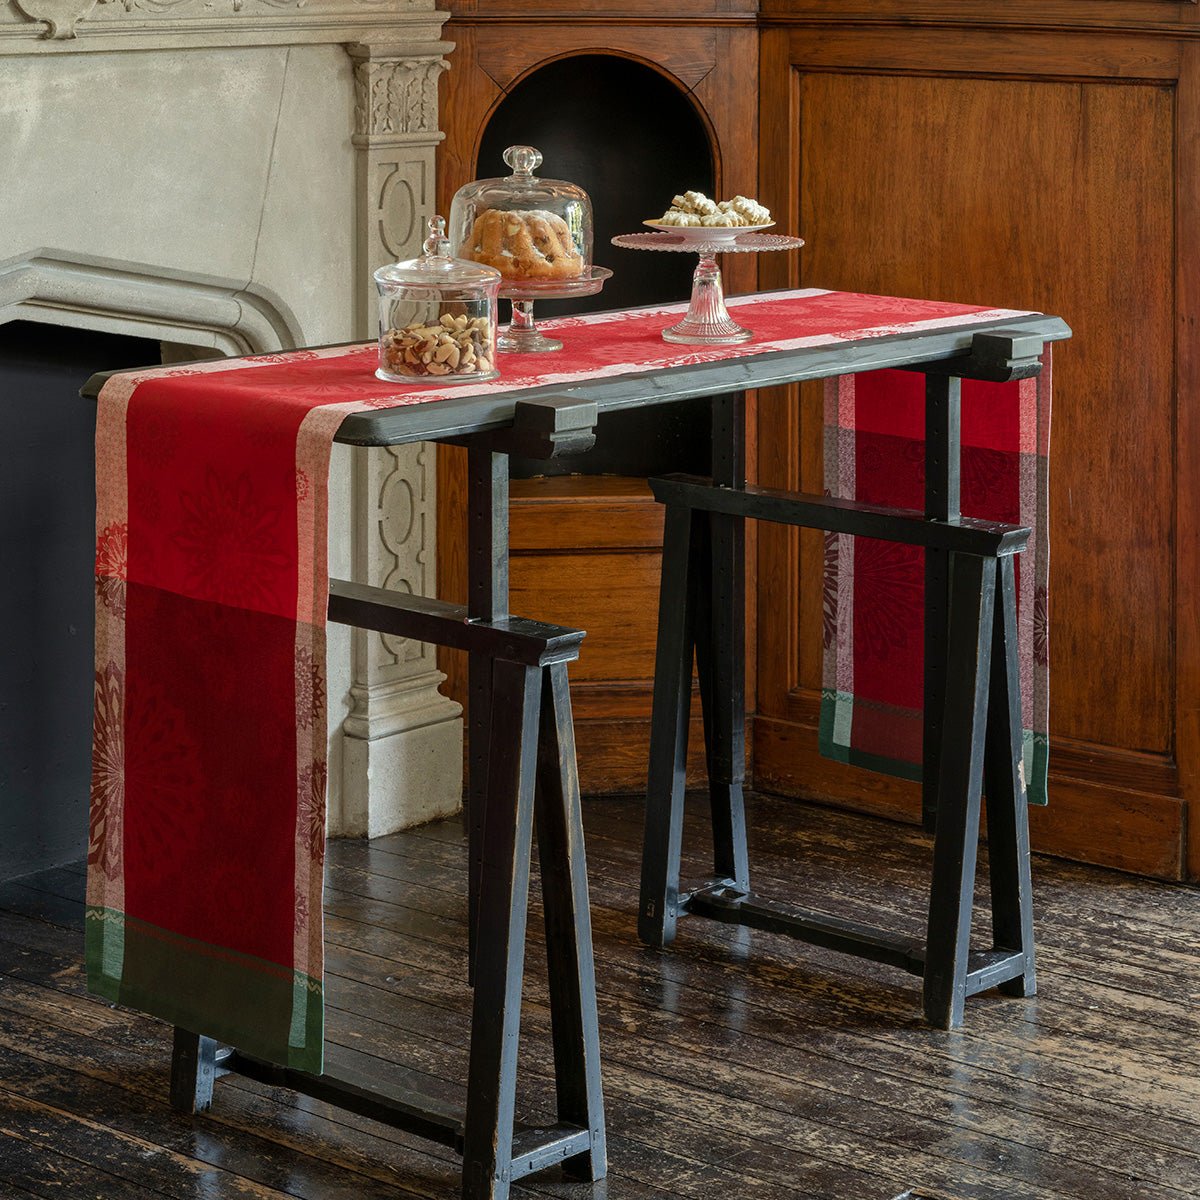 lumière d'étoiles red table runner by Le Jacquard Francais - shown on tall table